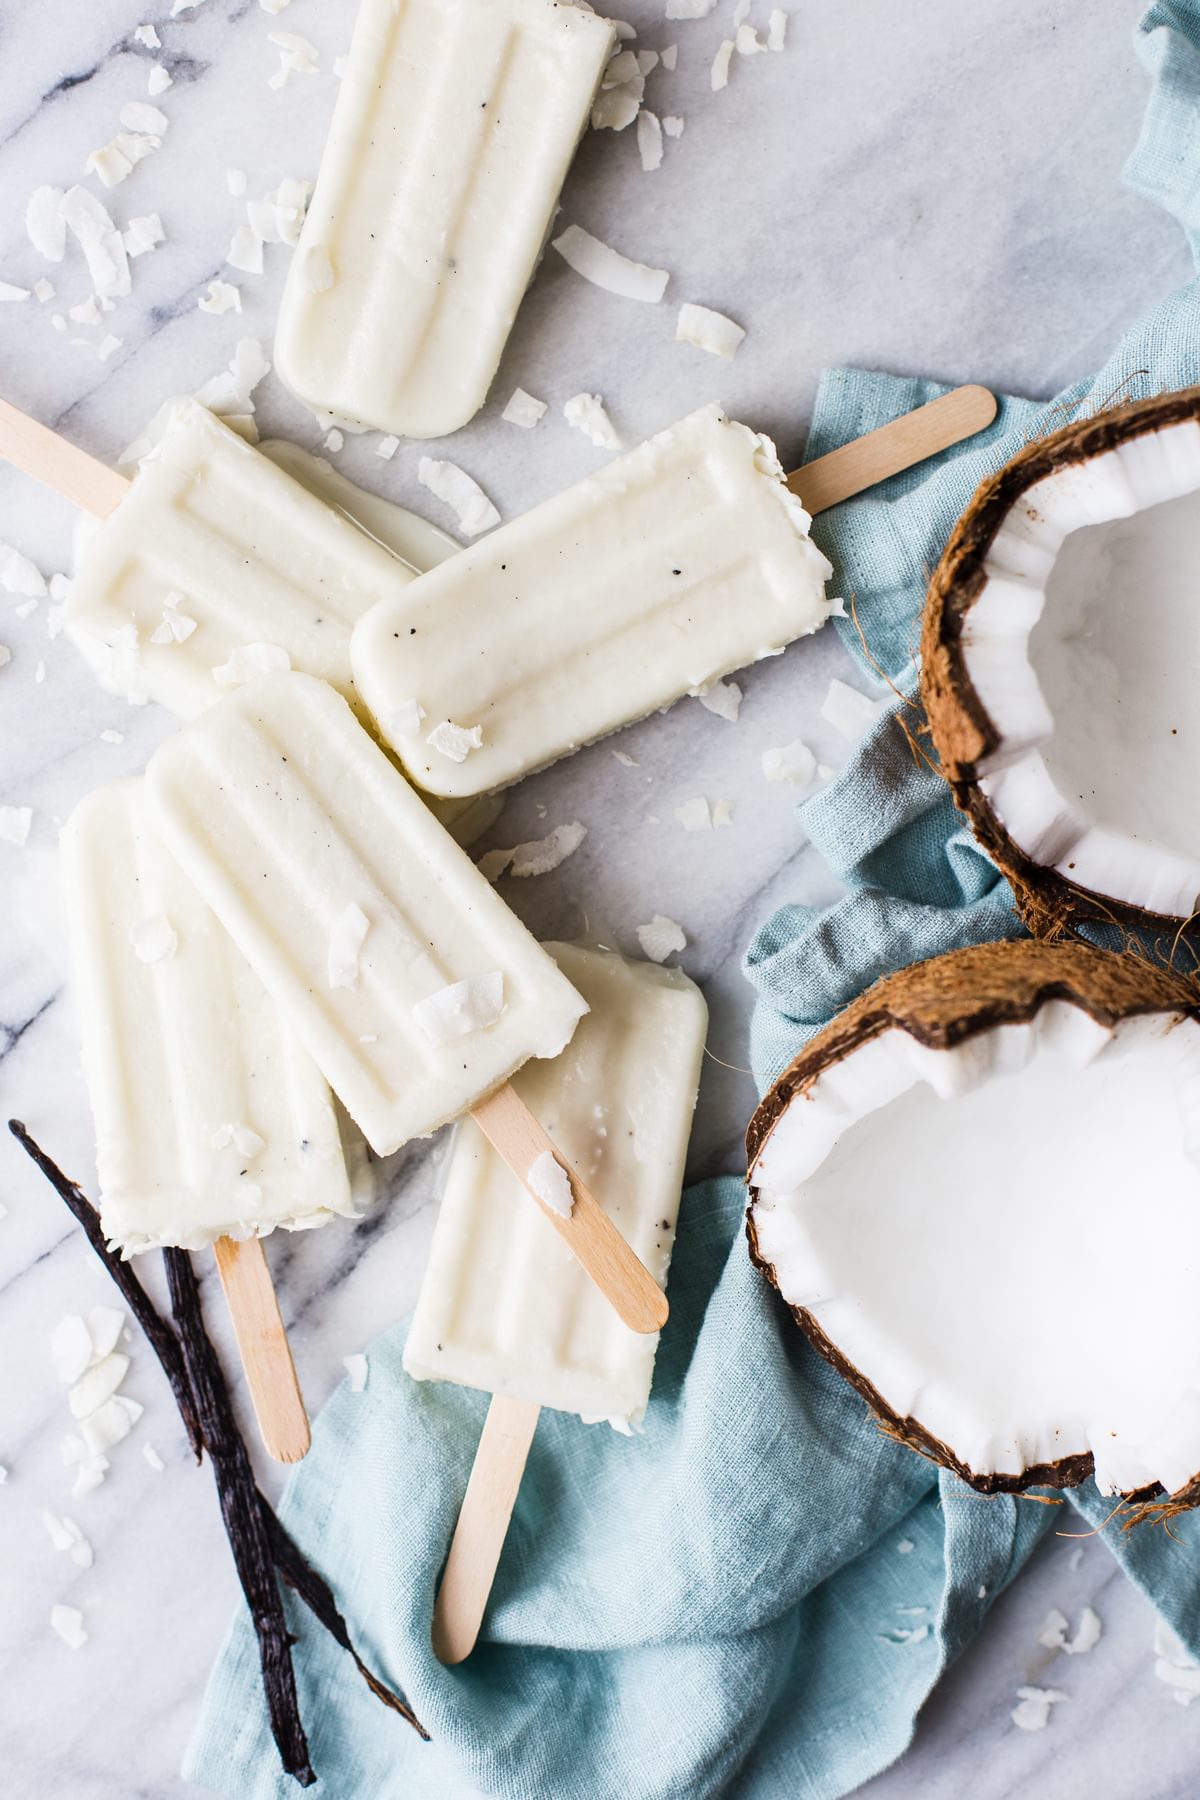 Coconut Cream Popsicles With Vanilla Bean And Malibu Rum next to an open coconut